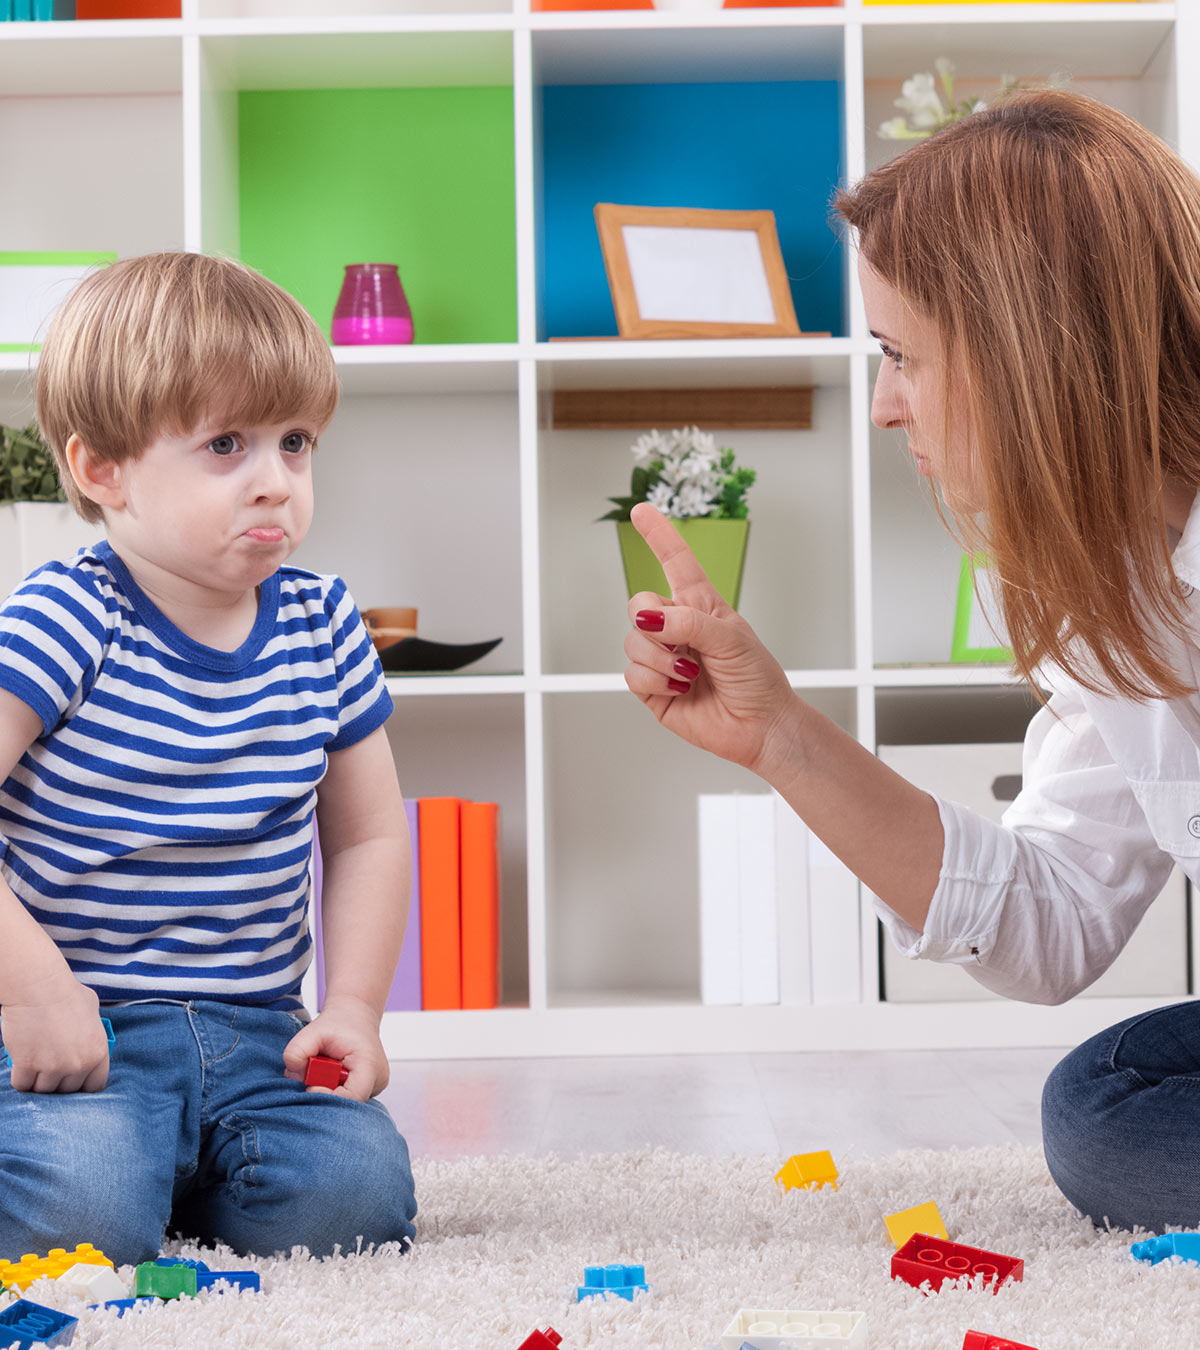 16 Signs of Bad Parenting And 7 Tips To Change